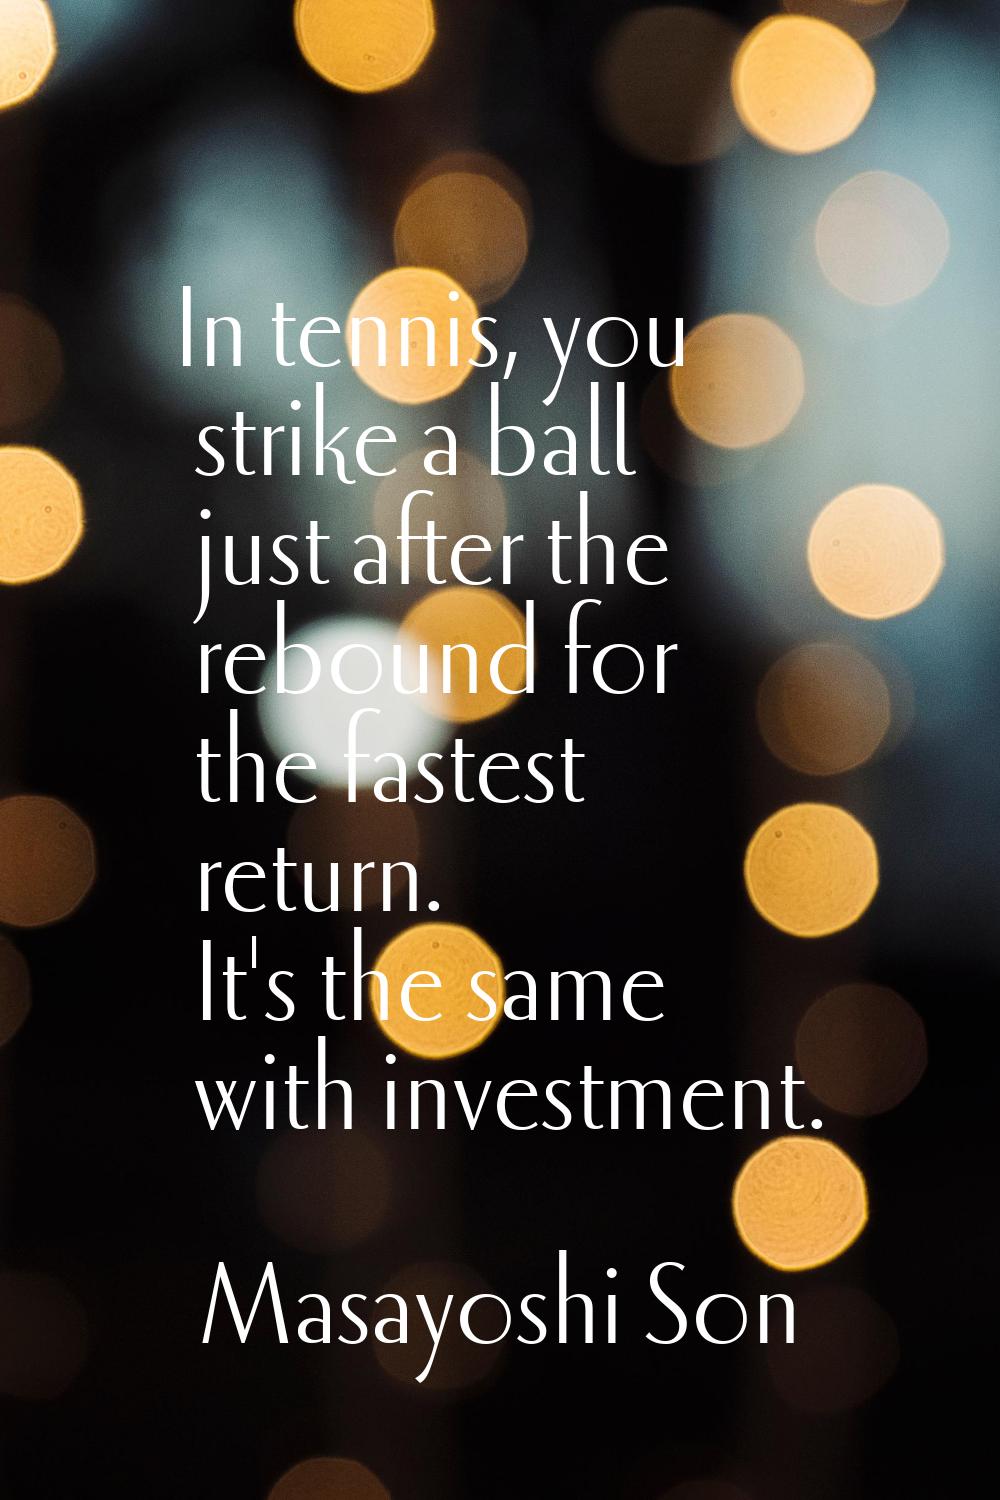 In tennis, you strike a ball just after the rebound for the fastest return. It's the same with inve